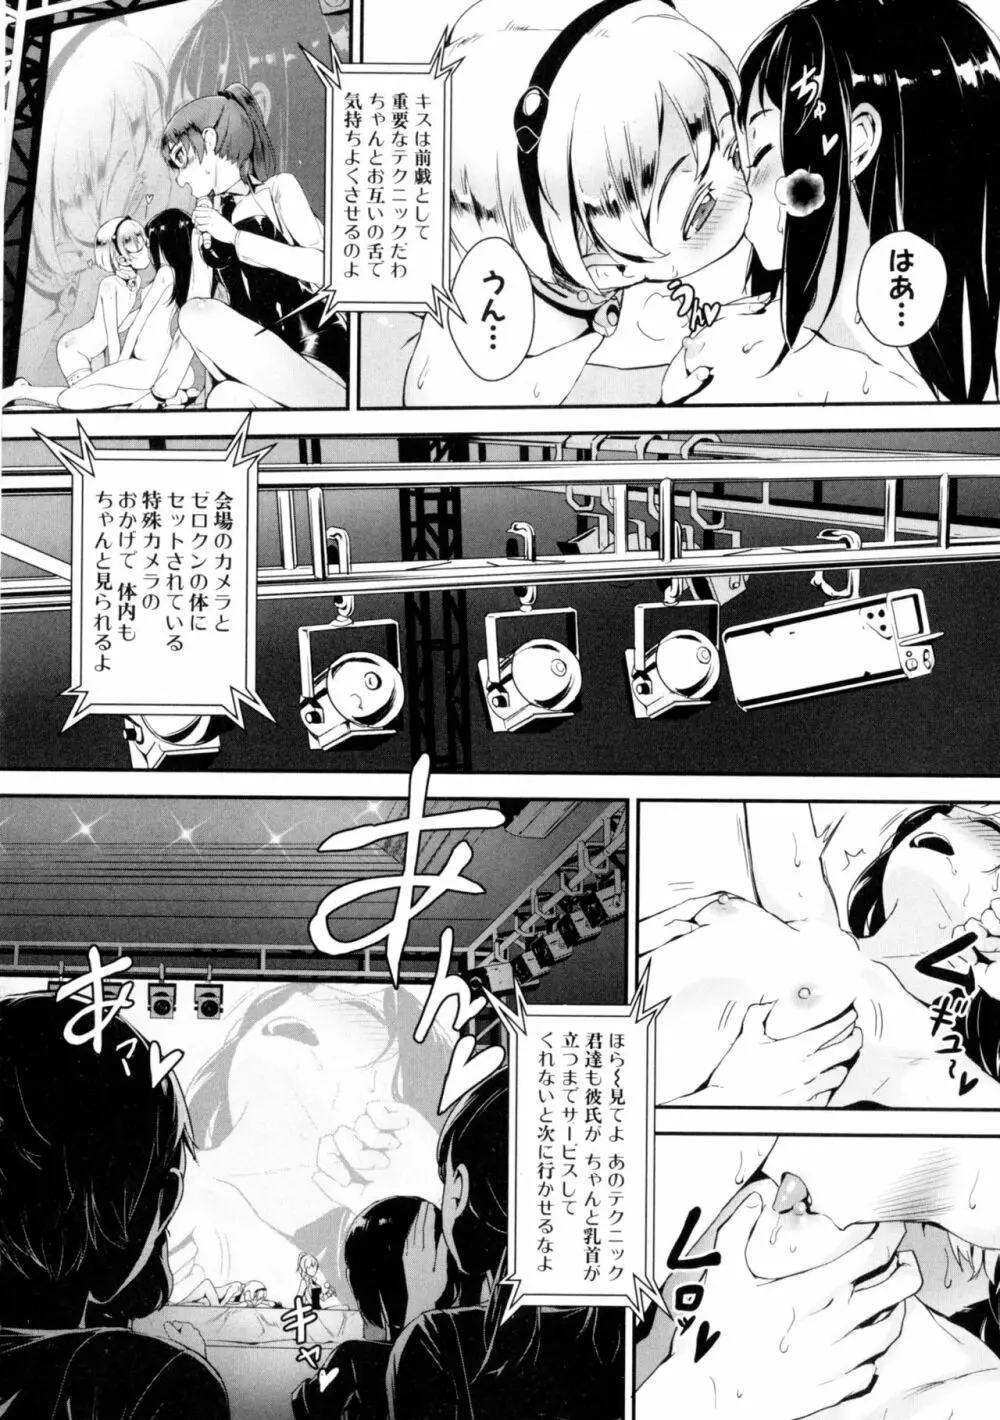 T.F.S 第1-4話 + 御負け PV Page.14